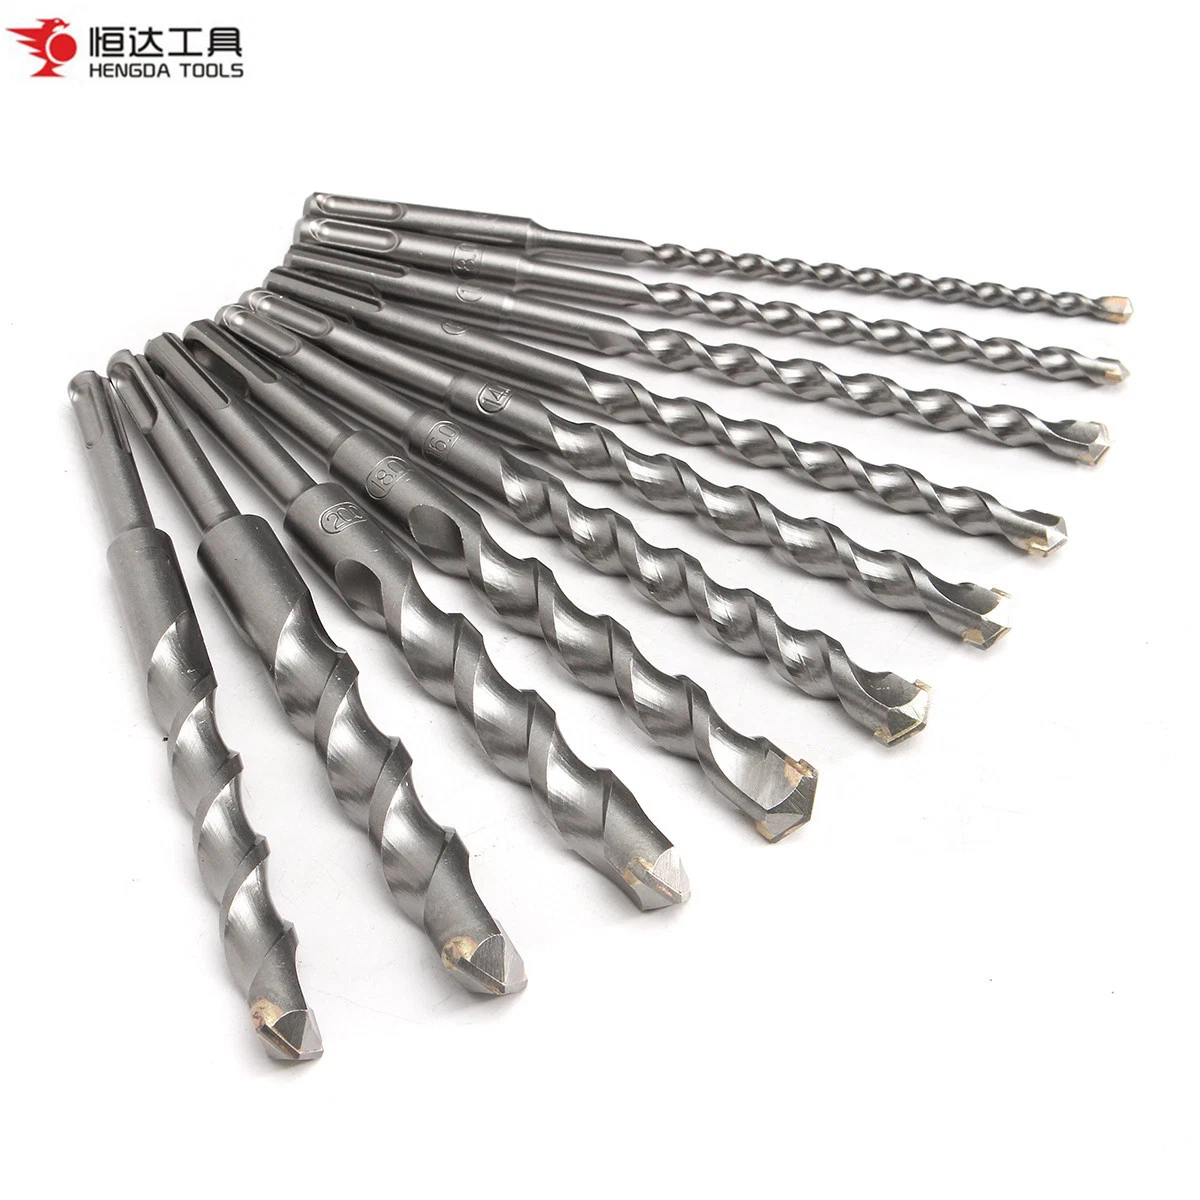 Solid Carbide Metal Drilling Hammer Drill Bit Hot Selling China Wholesale/Supplier Hammer Drill